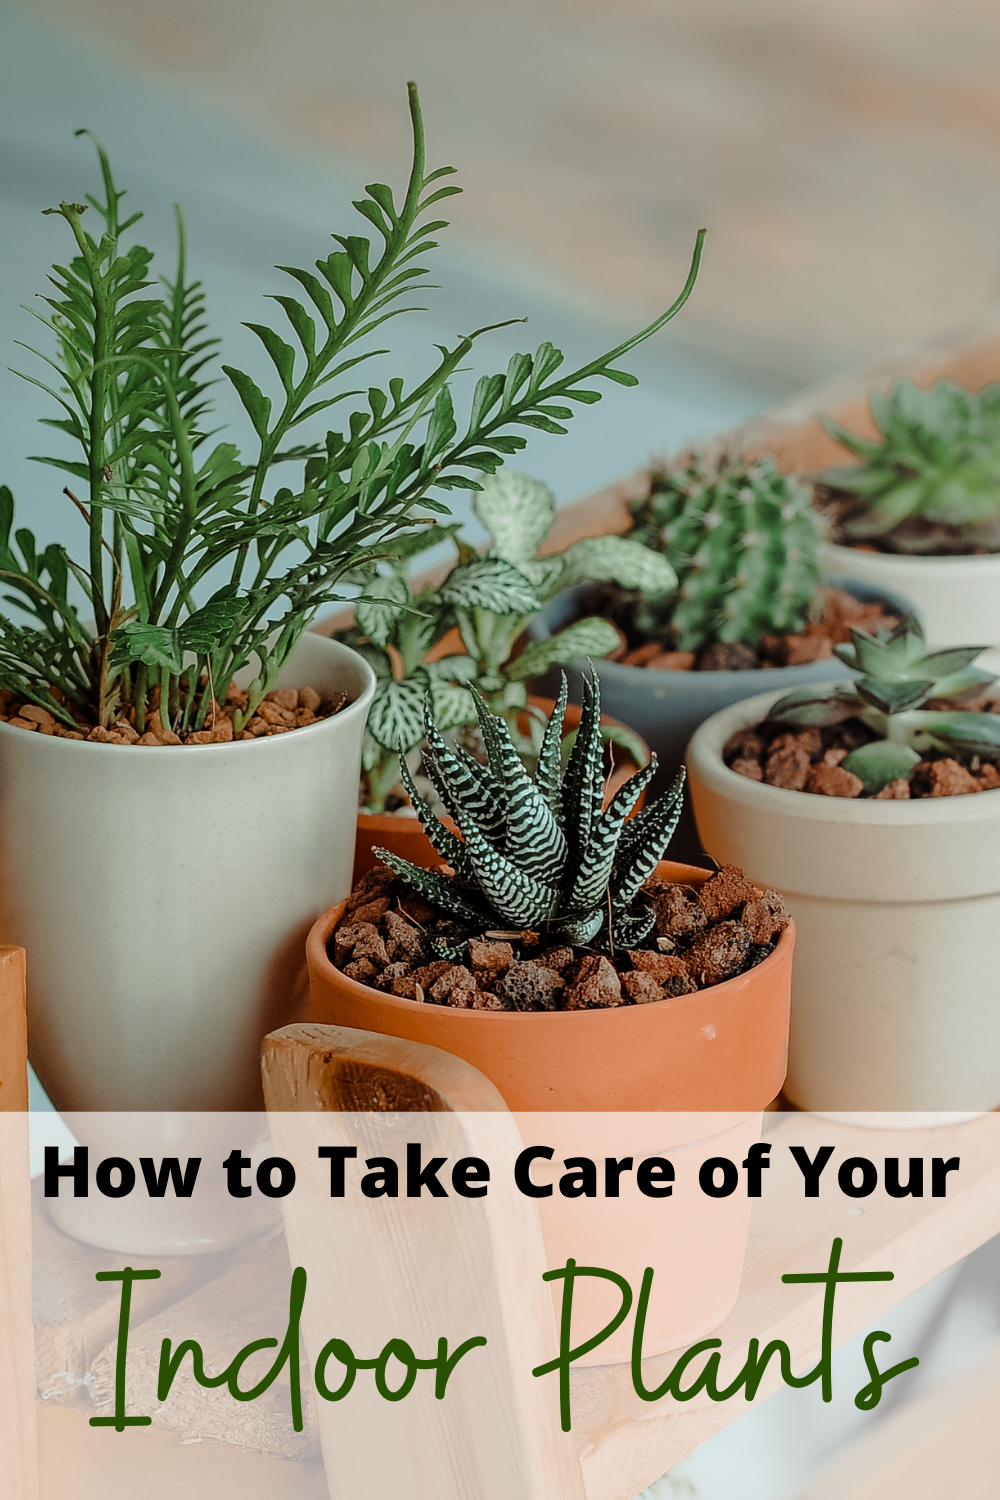 How to take care of indoor plants 